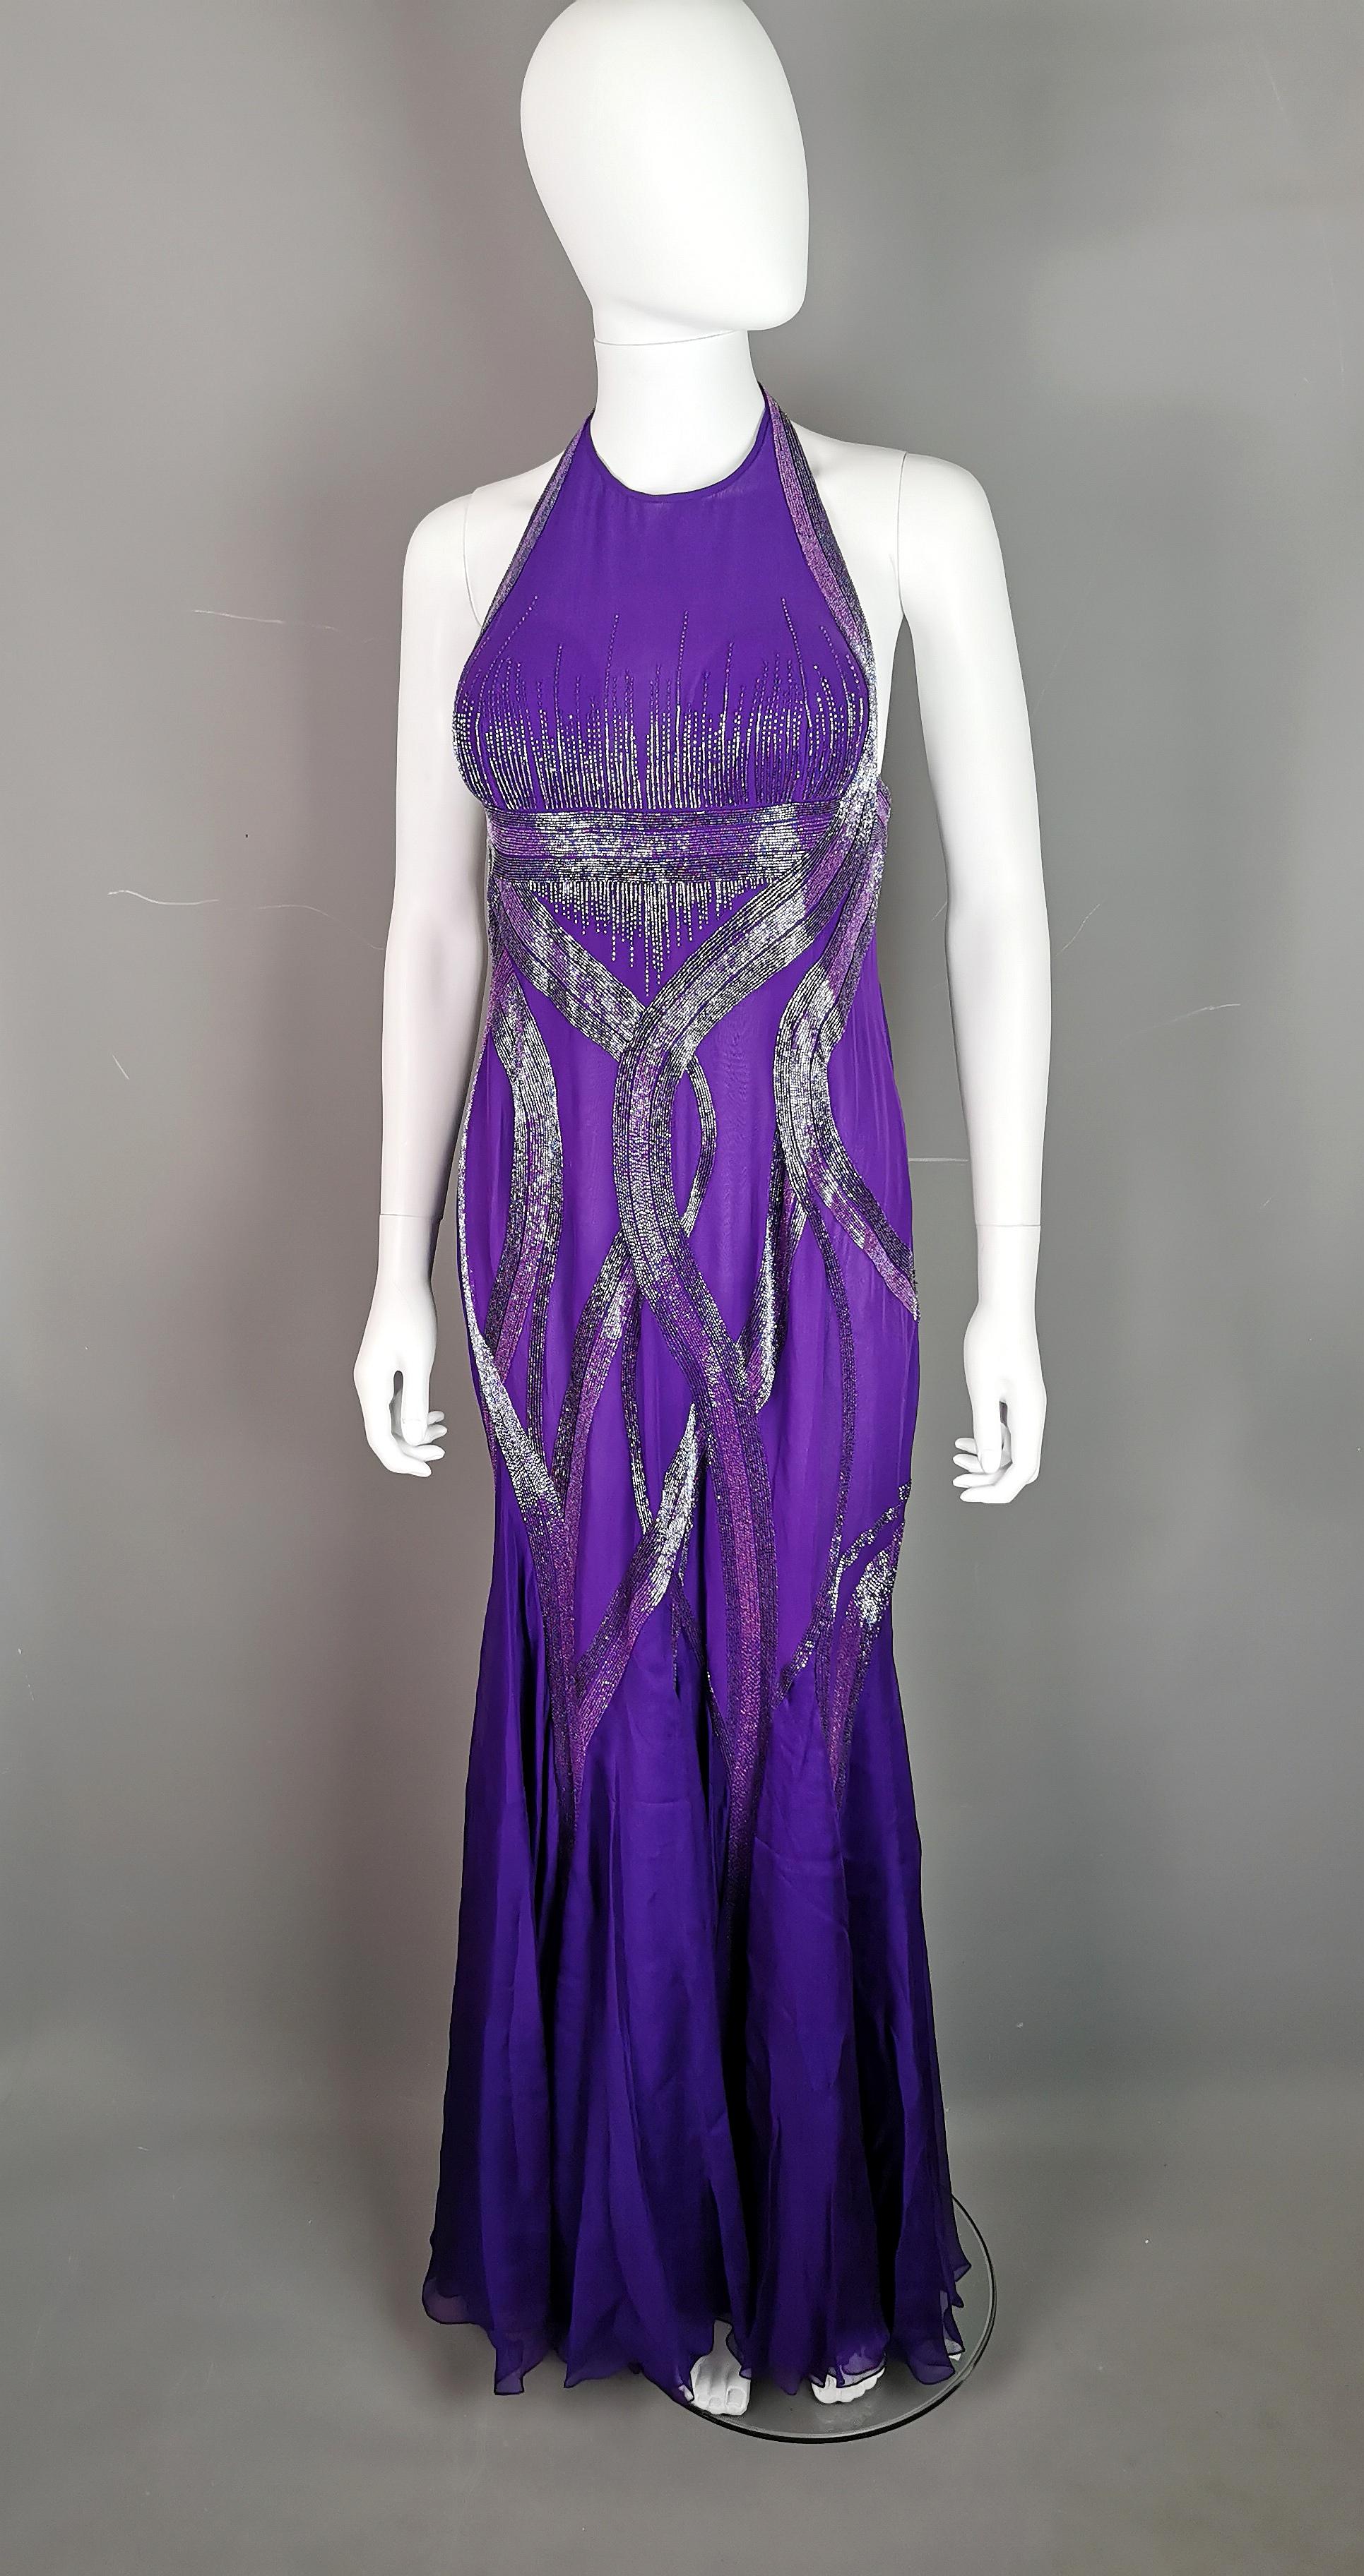 A simply stunning vintage Versace two tone purple silk chiffon beaded evening dress.

It has a figure hugging silhouette to the body with flowing waterfall skirts to the lower half with a slight train at the back giving a little elegance to the rich